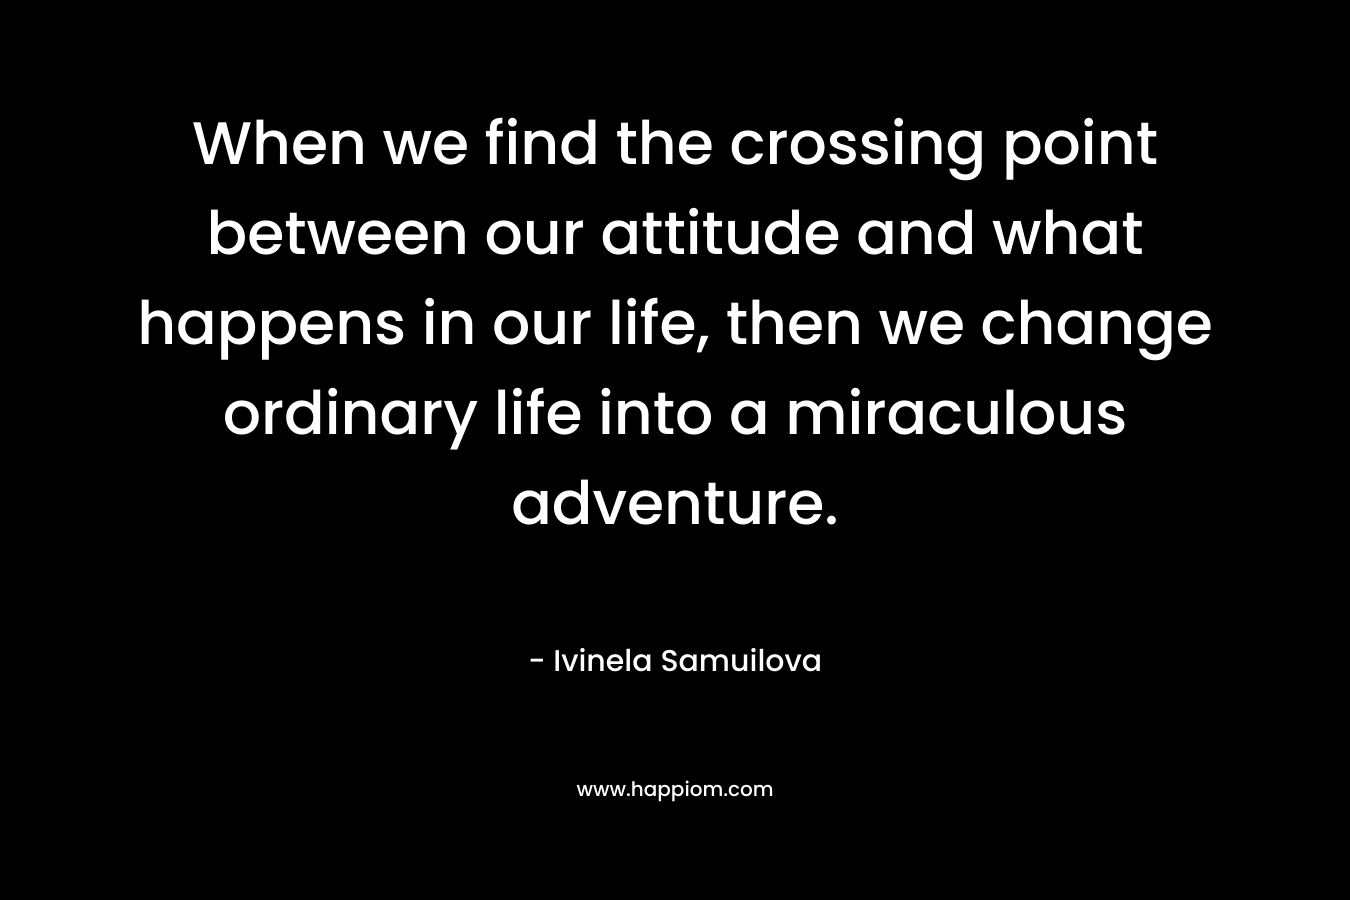 When we find the crossing point between our attitude and what happens in our life, then we change ordinary life into a miraculous adventure. – Ivinela Samuilova